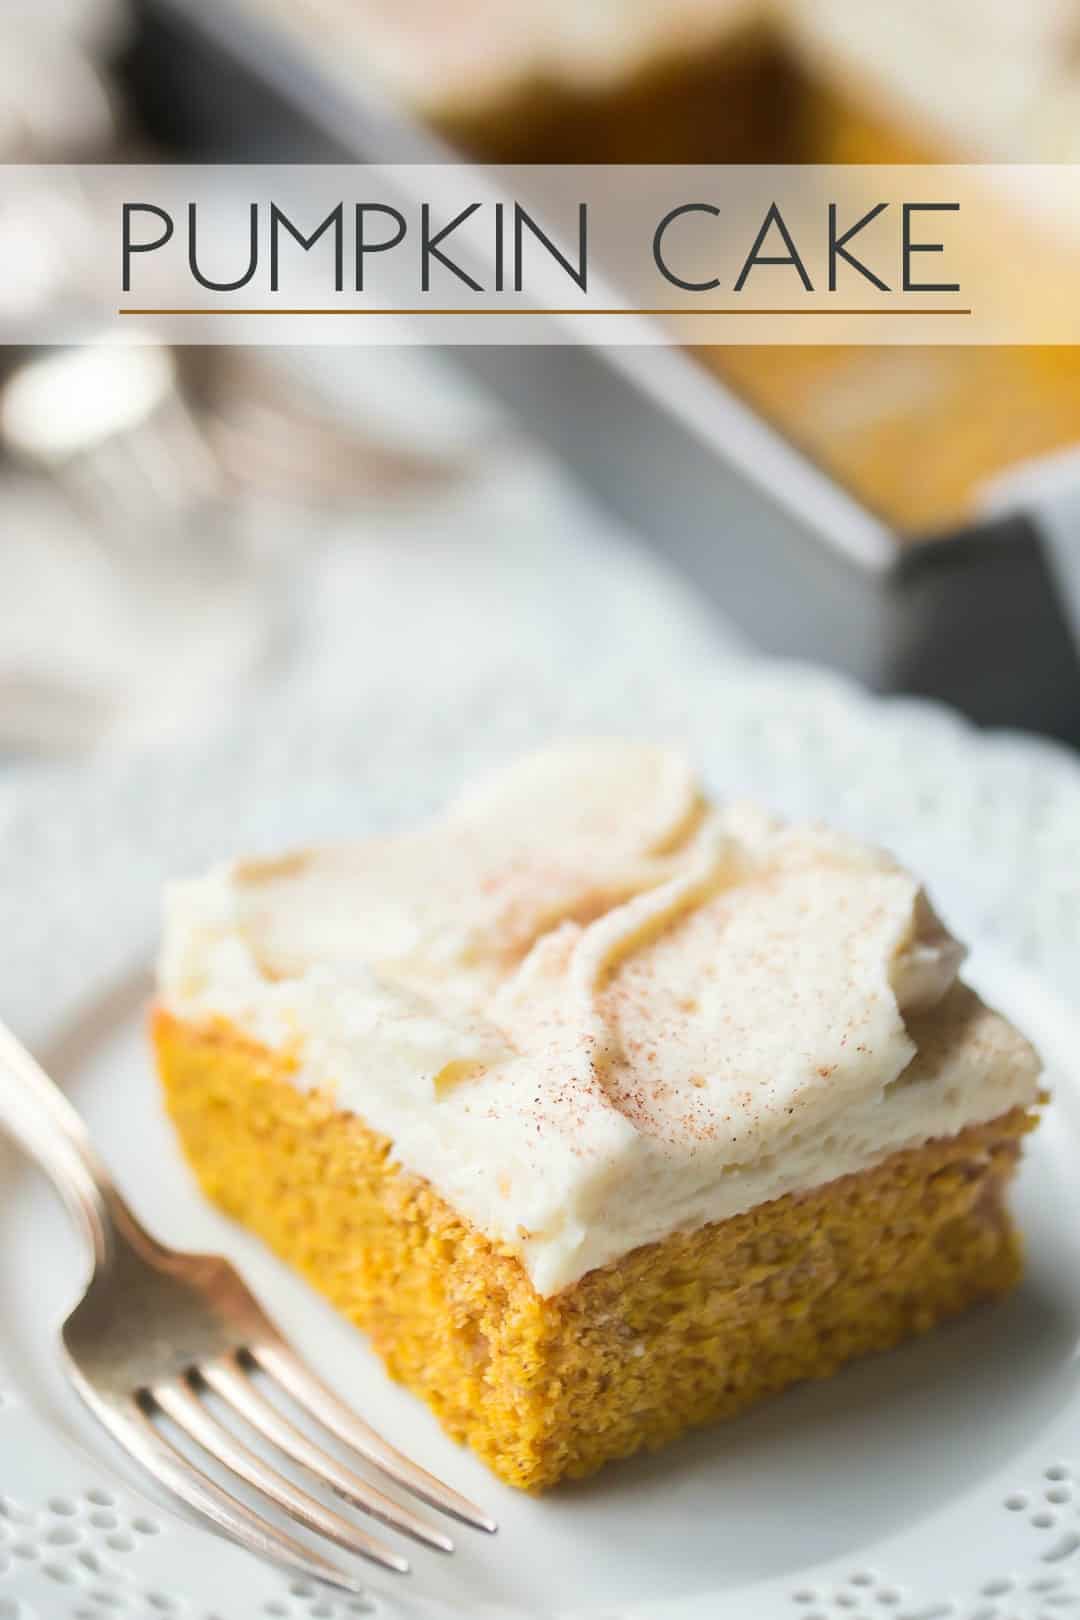 Square of pumpkin cake with cream cheese icing on a white plate, with a text overlay above that reads "Pumpkin Cake."